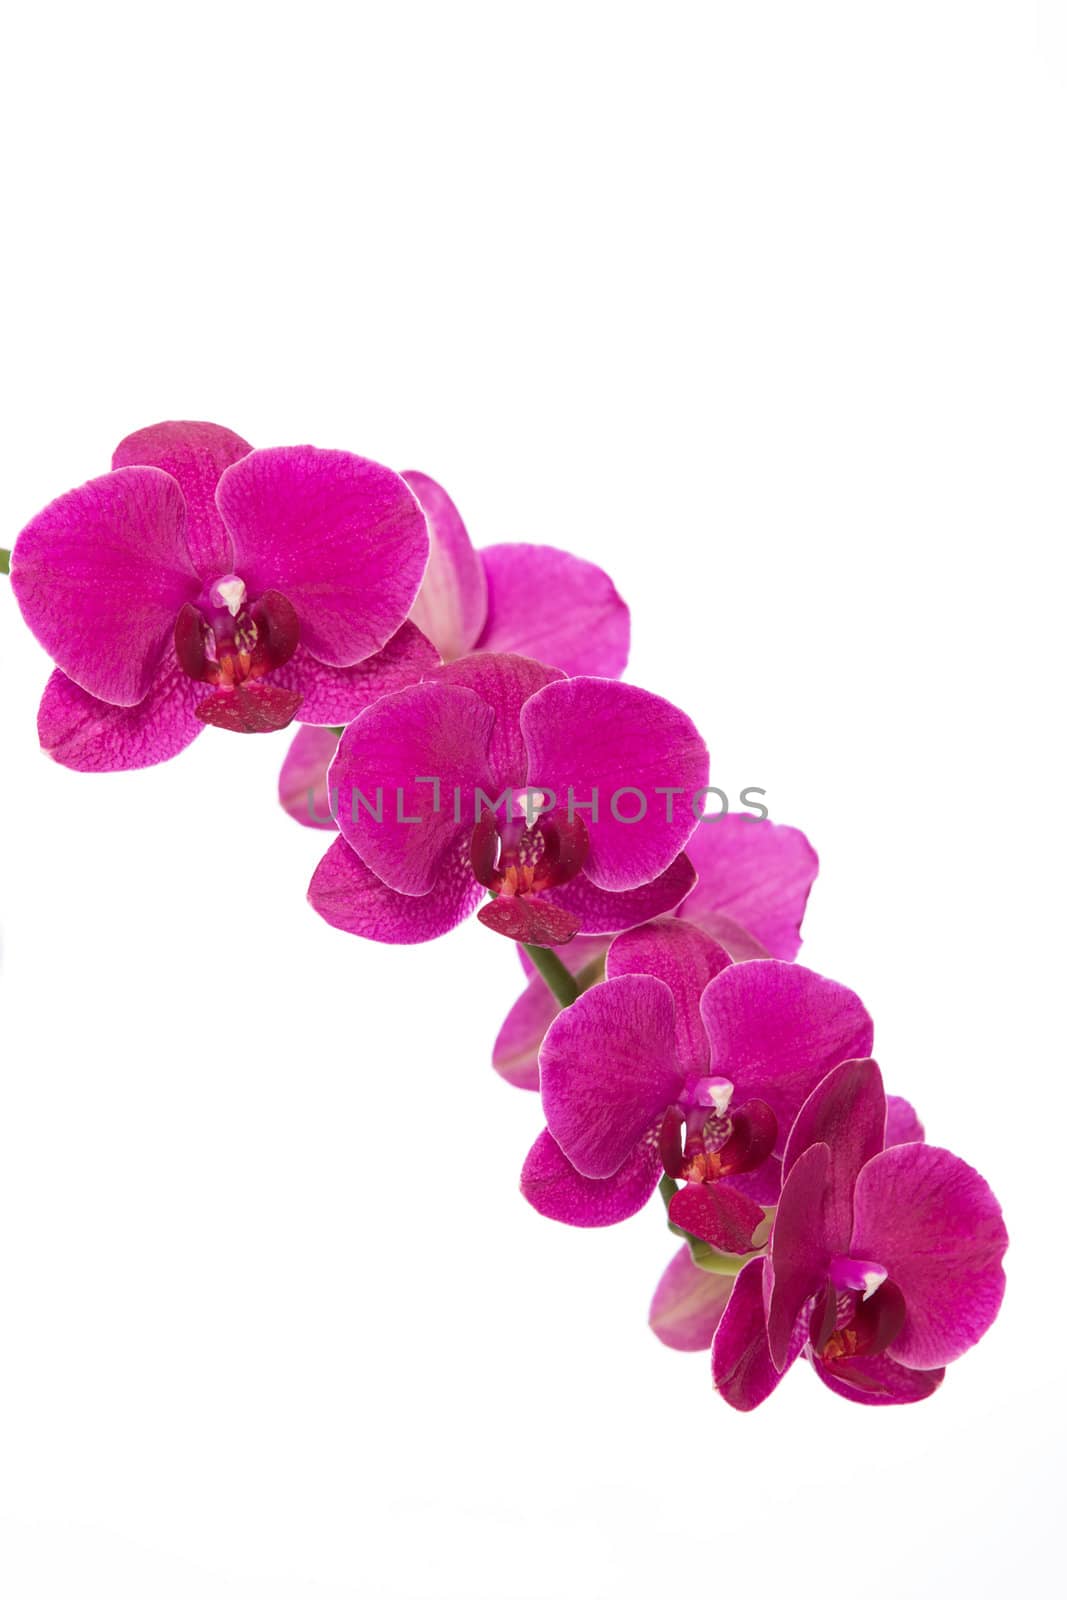 Blooms of pink orchid on white background